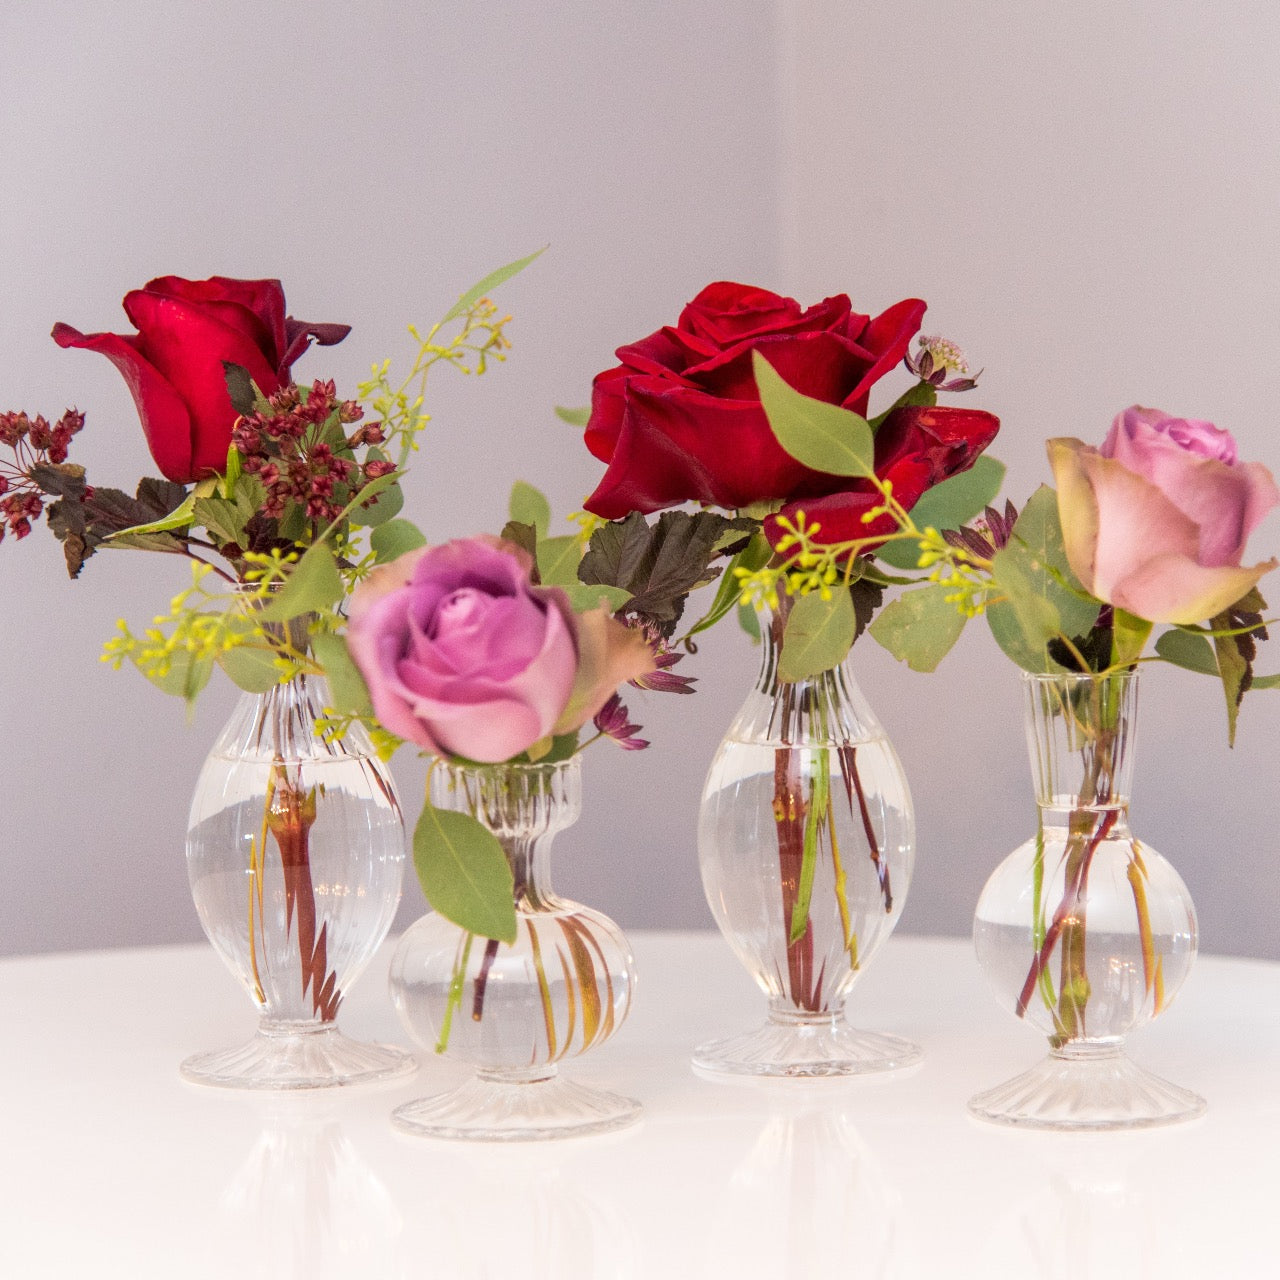 Dreamboat Bud Vases in Chantilly VA - Twinbrook Floral Design